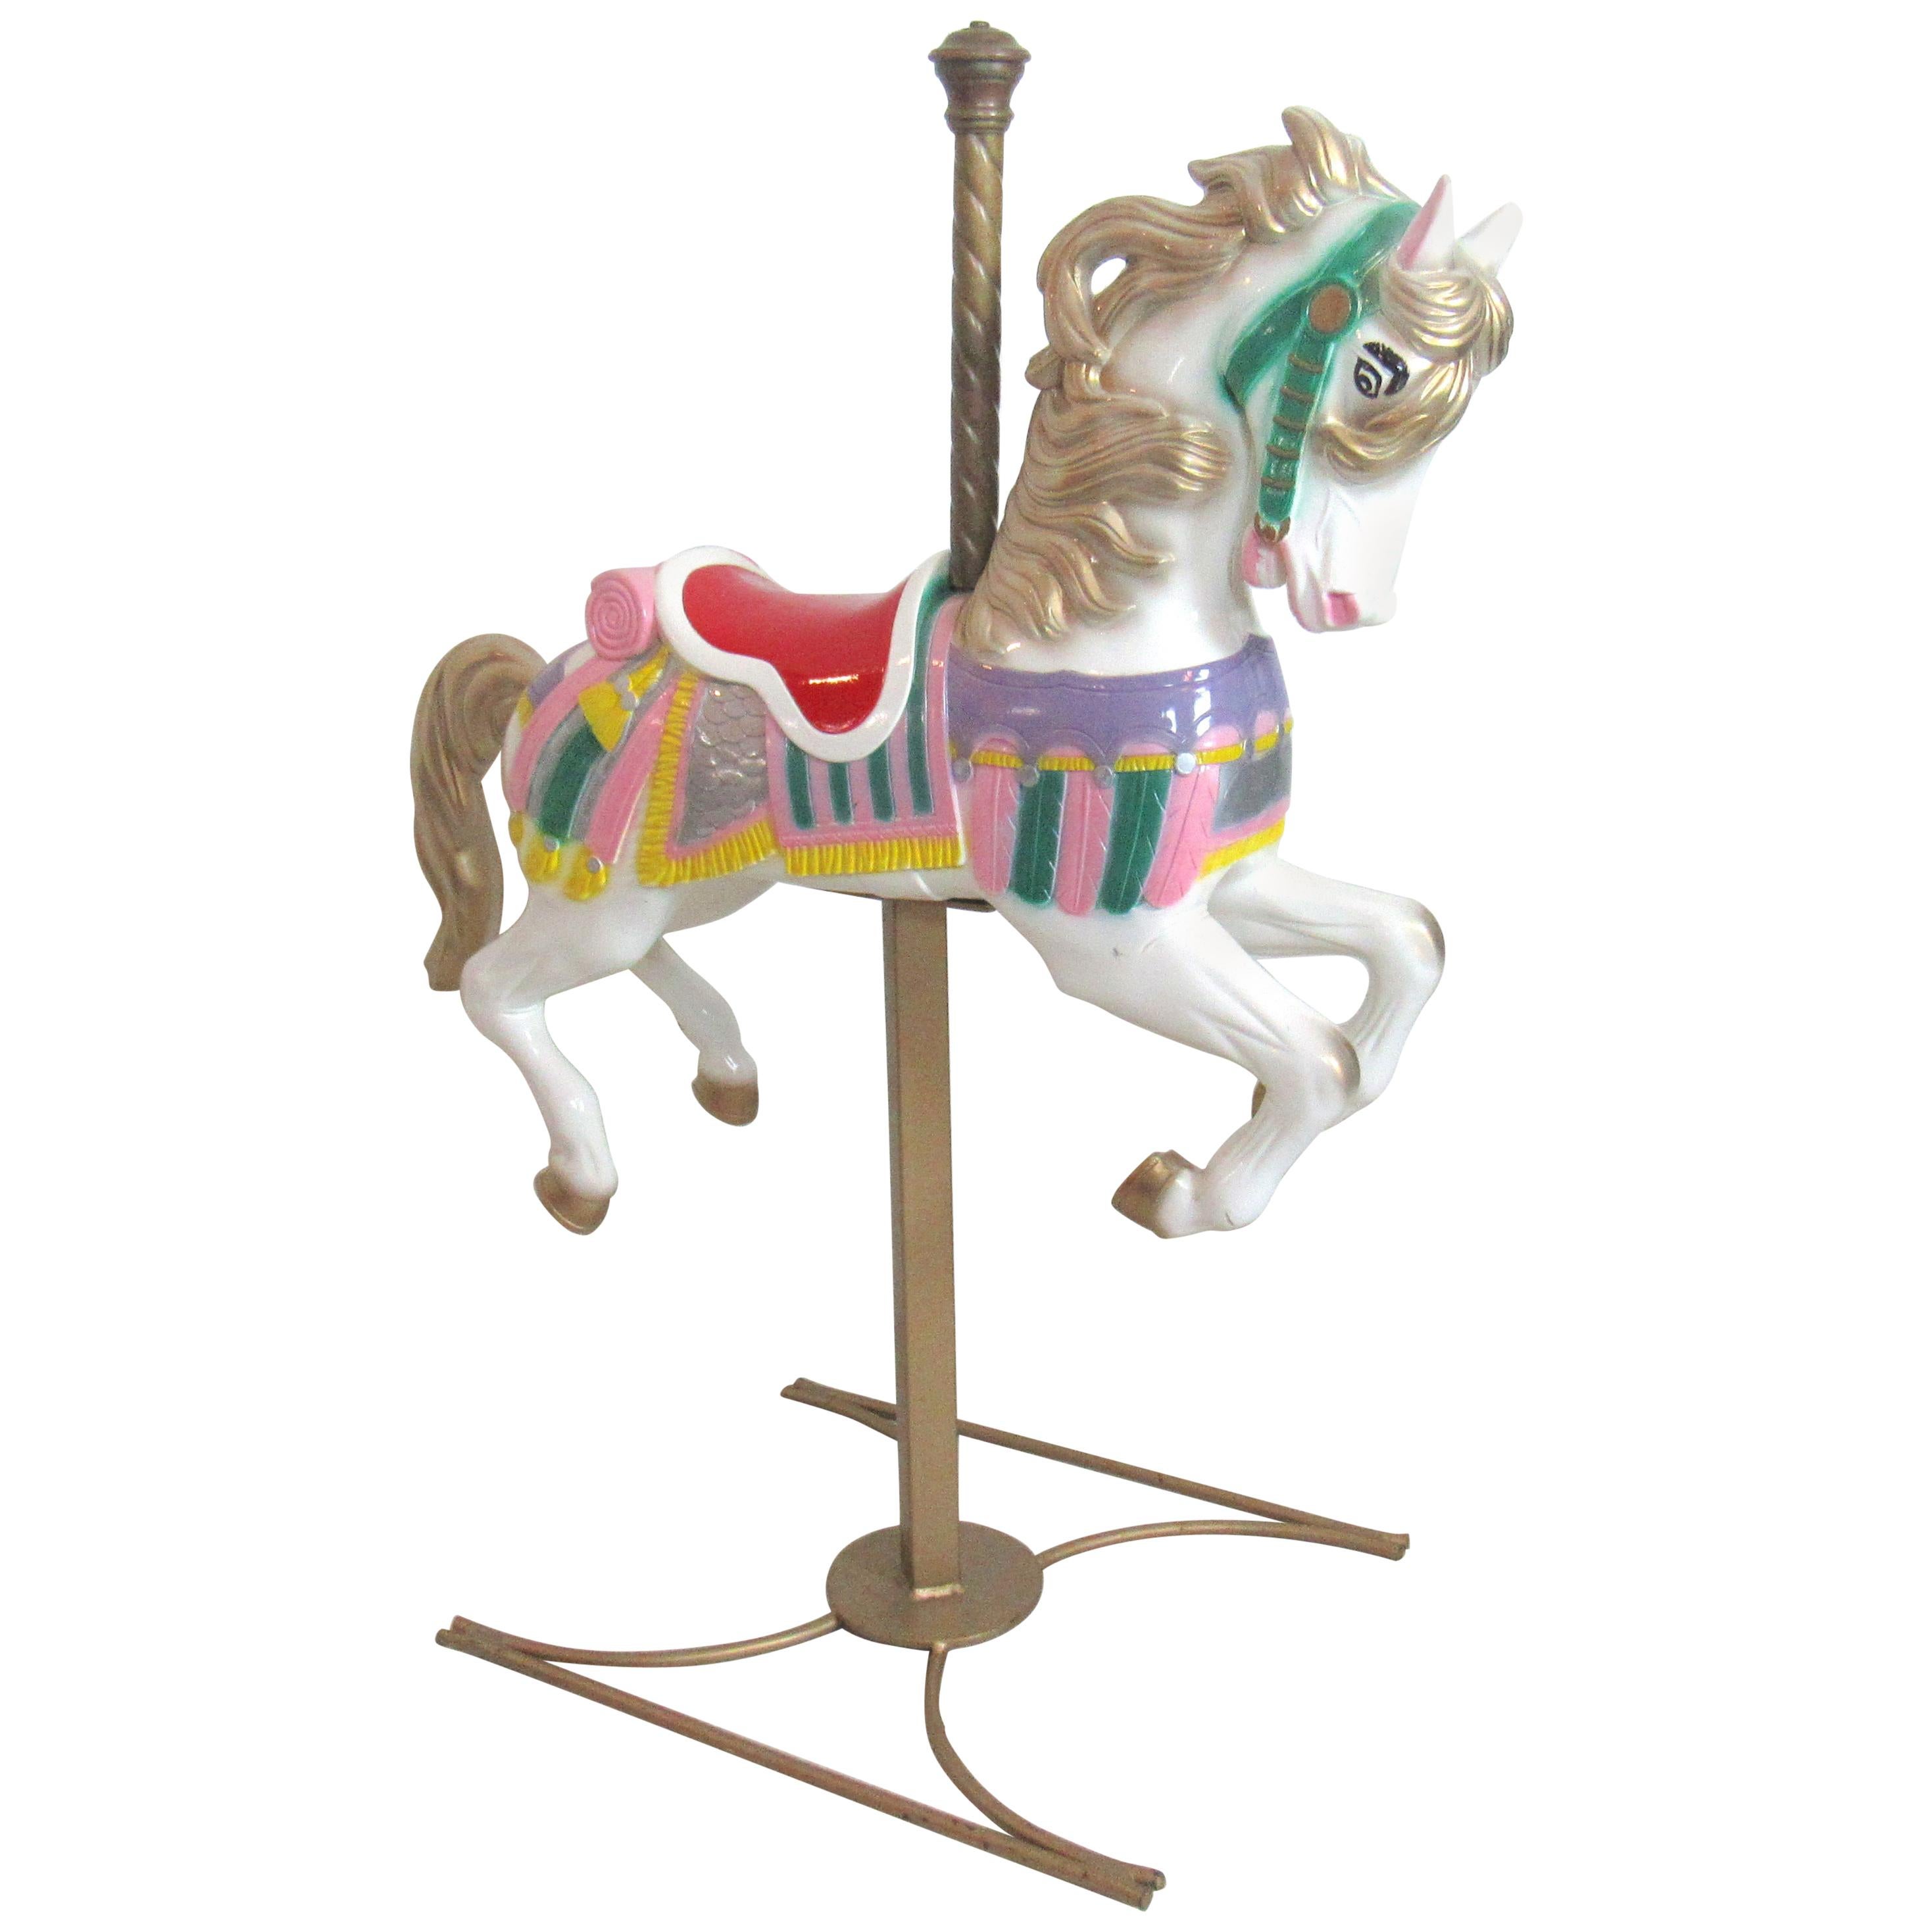 BOYD SATIN CANDY THE CAROUSEL HORSE  #12 PALE ORCHID PRICE REDUCED!! 